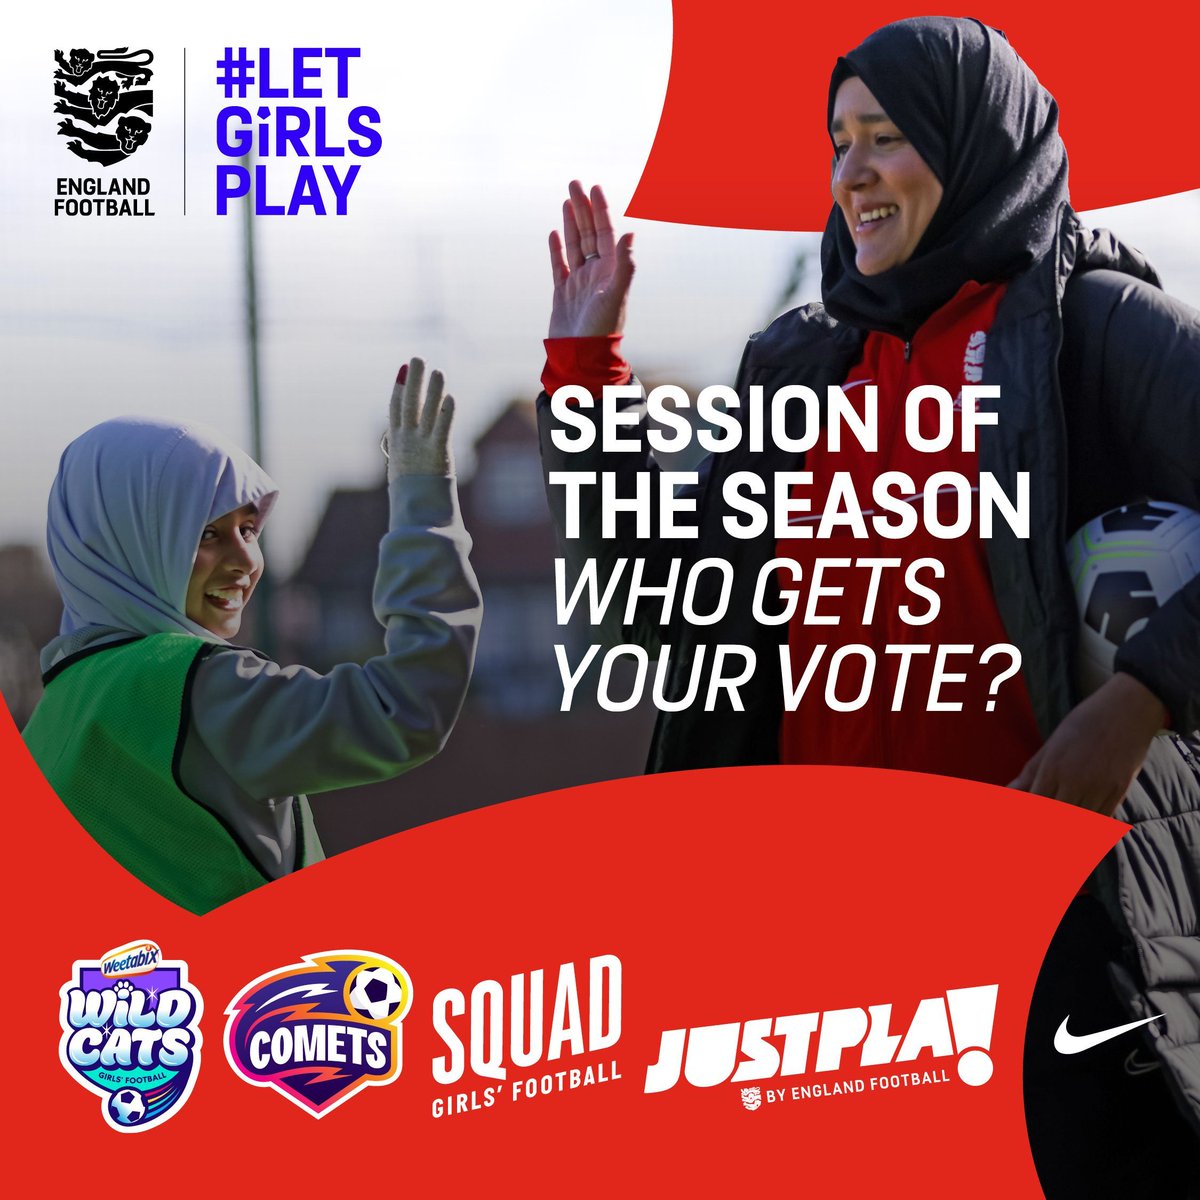 We're still on the lookout for this year's Session of the Season winners 🏆 🐱 Weetabix Wildcats ☄️ Comets 👧 Squad Girls' Football ⚽ Just Play Nominate your number 1️⃣ session now 👉 eng.football/7z1wXi Nominations close 5pm on Friday 17th May. 📆